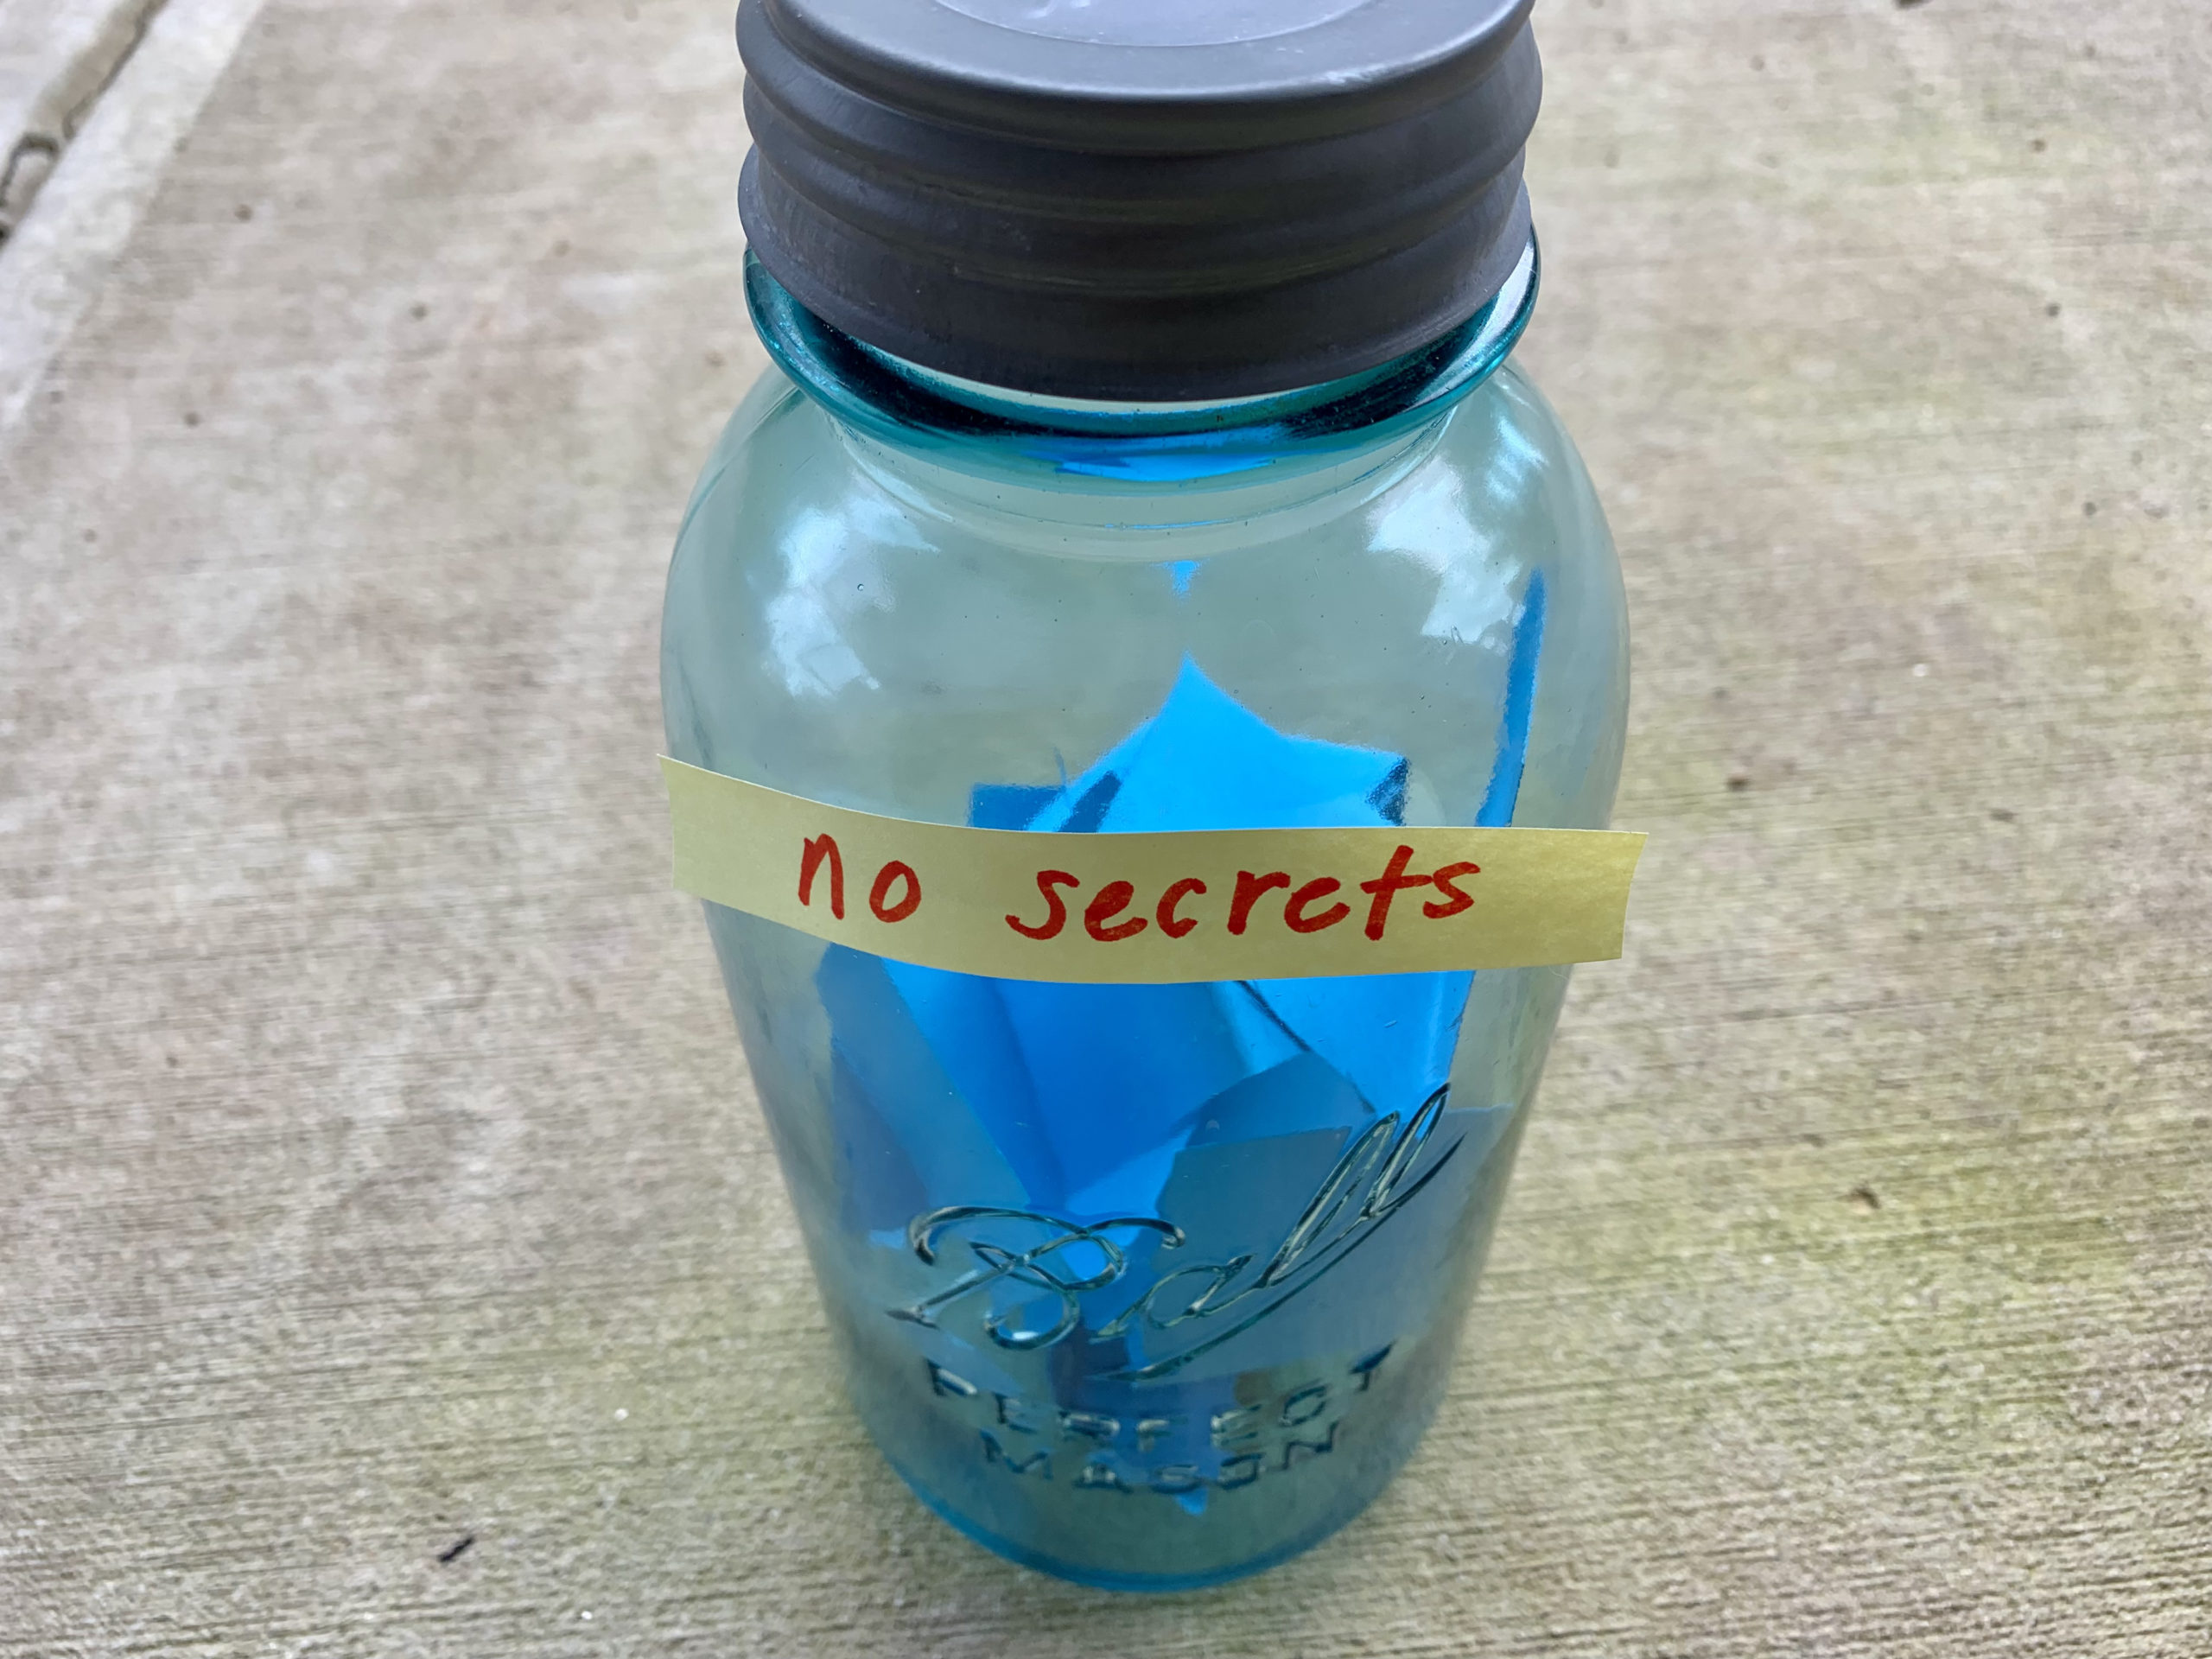 The First Secret to Thriving is There Are No Secrets